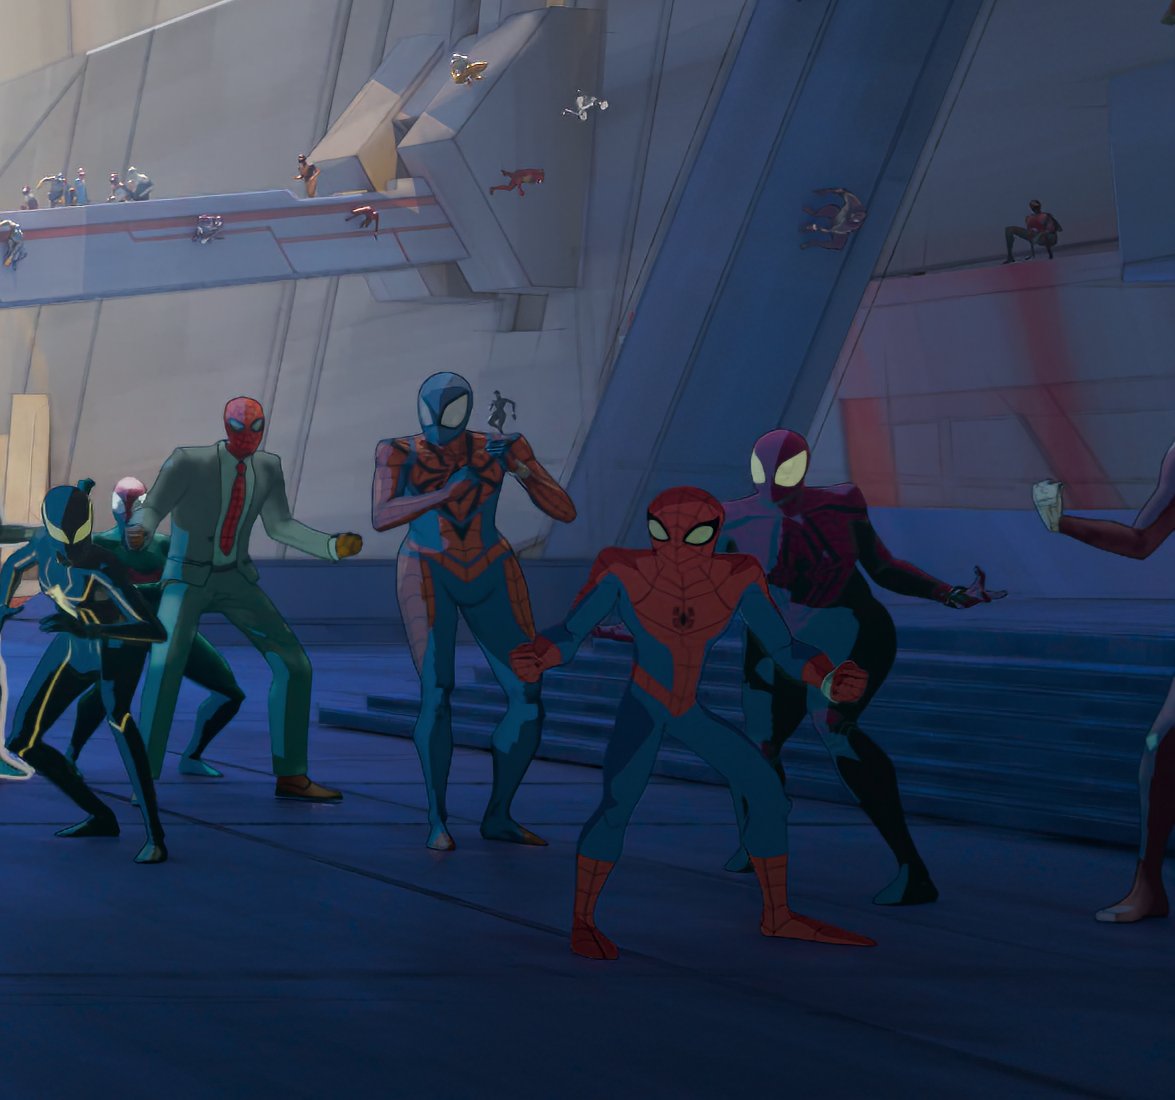 RT @SpiderMan3news: Better quality look at spectacular spider-man in Across the spider-verse https://t.co/3fsMRnm5ip